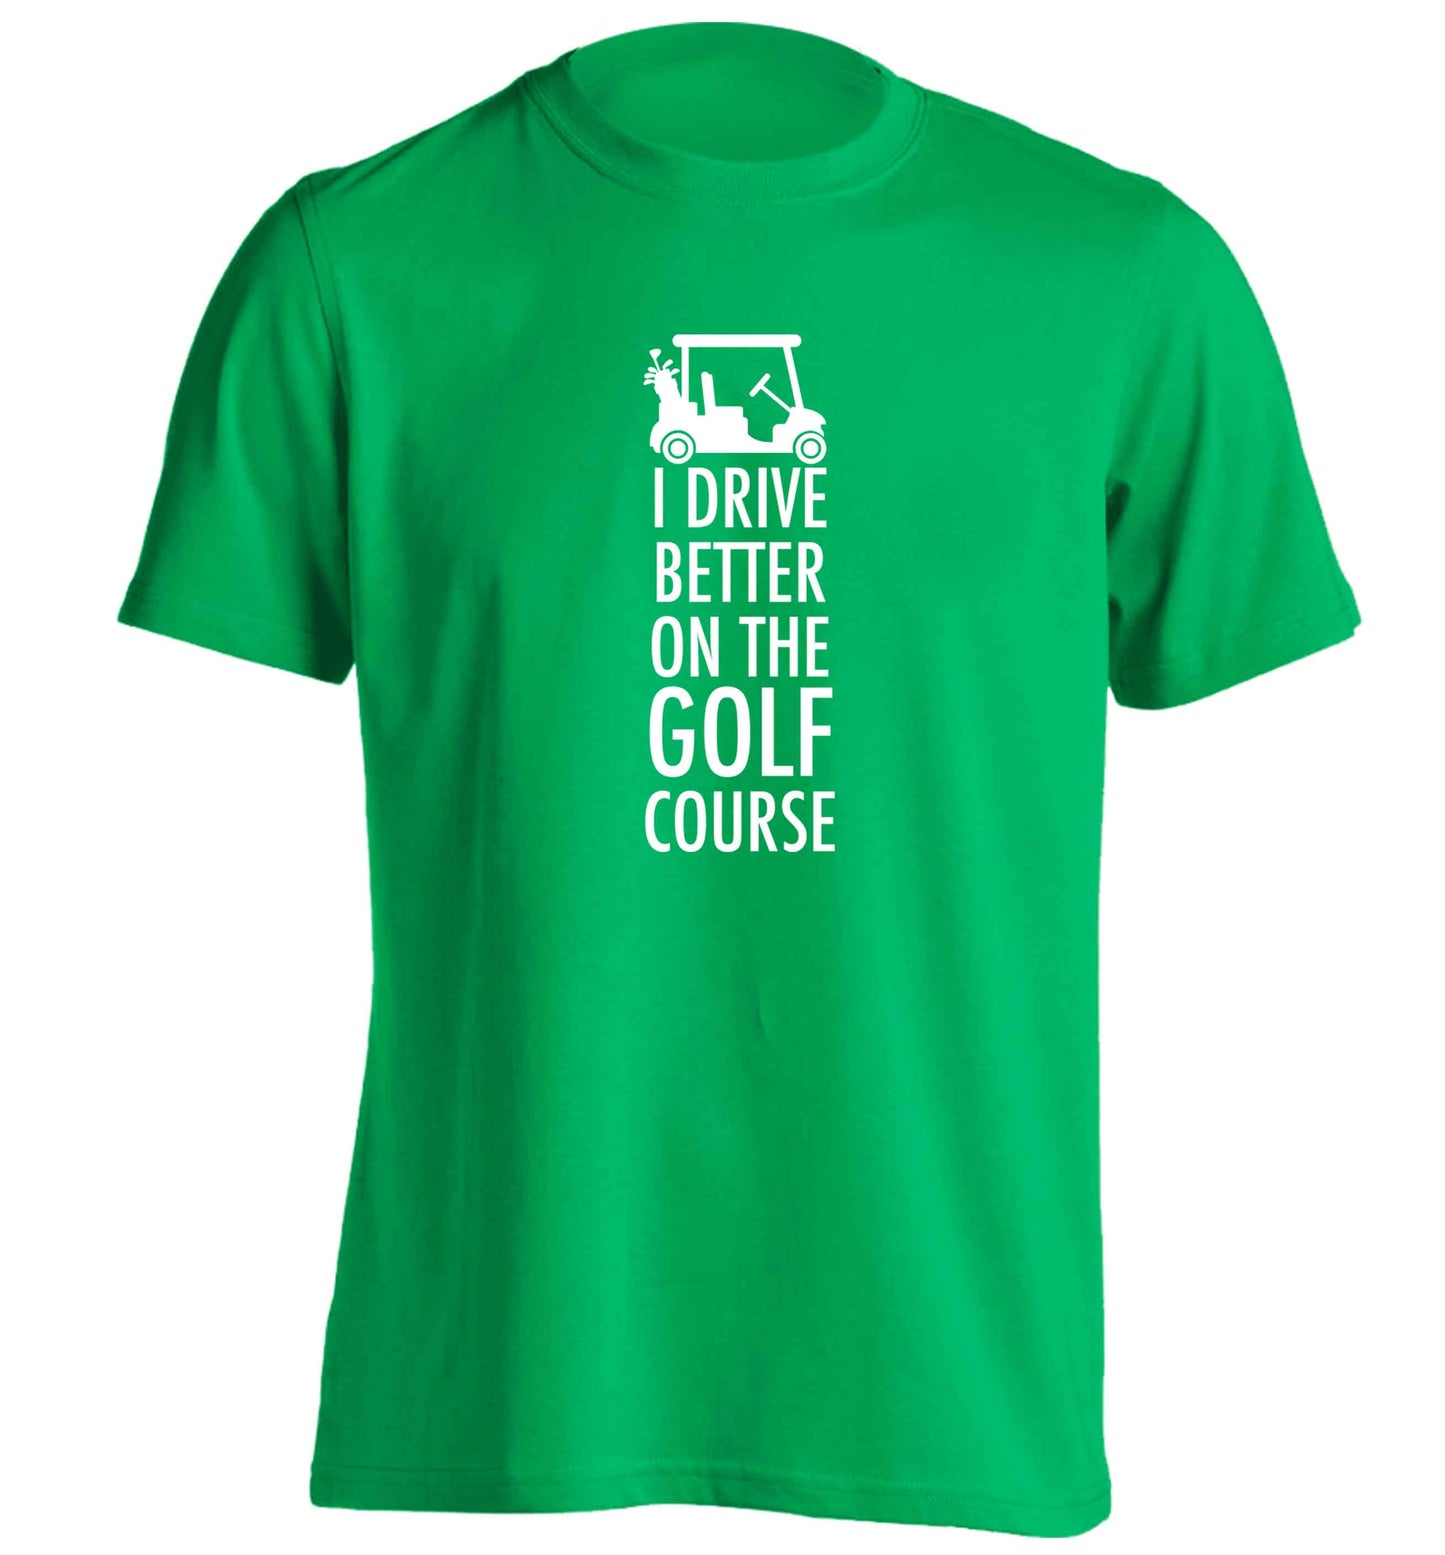 I drive better on the golf course adults unisex green Tshirt 2XL